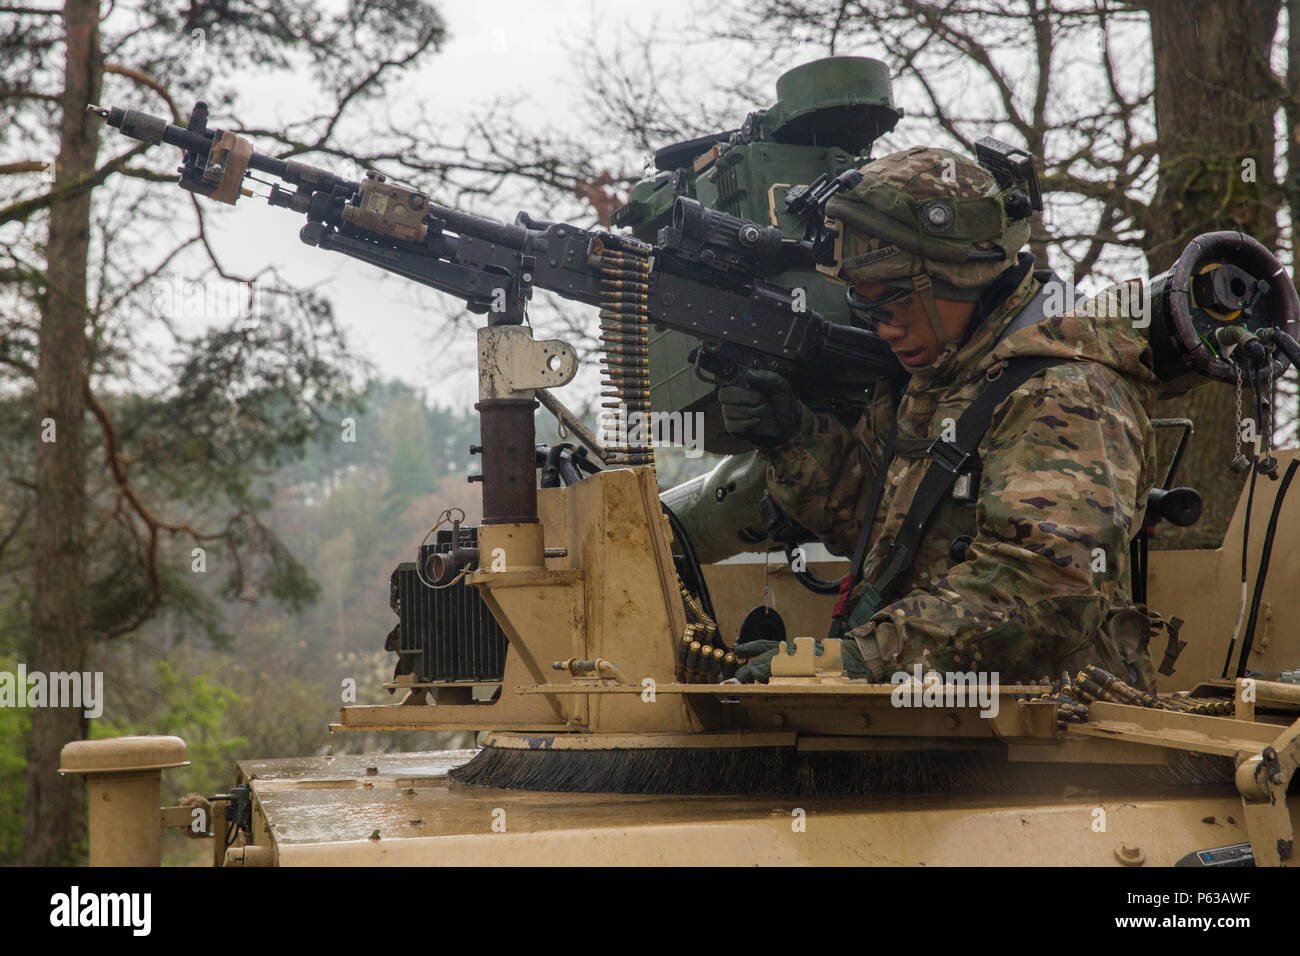 A U.S. Soldier of Delta Company, 2nd Battalion, 503rd Airborne Infantry Regiment, 173rd Airborne Brigade reloads while the convoy creates a defensive position during exercise Saber Junction 16 at the U.S. Army’s Joint Multinational Readiness Center (JMRC) in Hohenfels, Germany, April 16, 2016. Saber Junction 16 is the U.S. Army Europe’s 173rd Airborne Brigade’s combat training center certification exercise, taking place at the JMRC in Hohenfels, Germany, Mar. 31-Apr. 24, 2016.  The exercise is designed to evaluate the readiness of the Army’s Europe-based combat brigades to conduct unified land Stock Photo